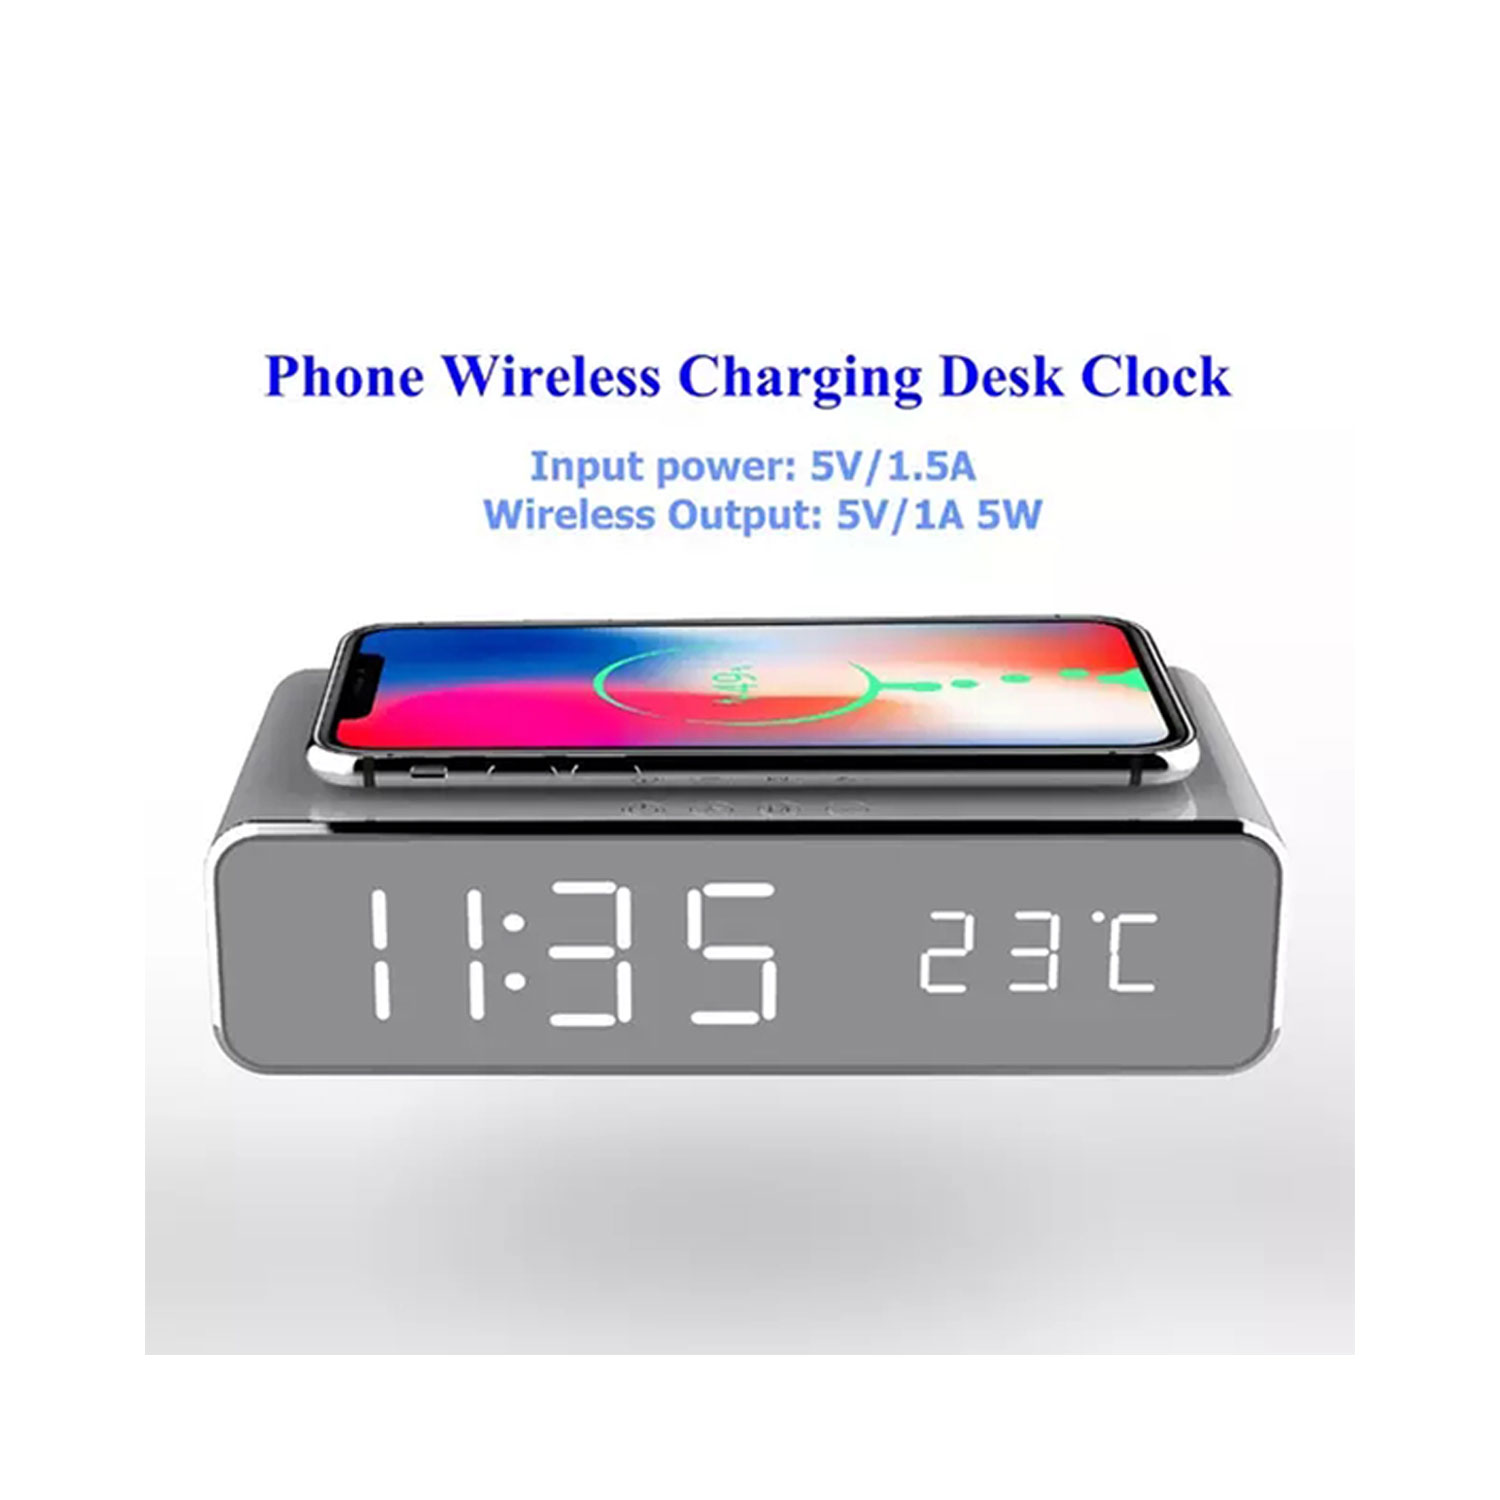 LED Alarm Clock With Wireless Charger And USB Port